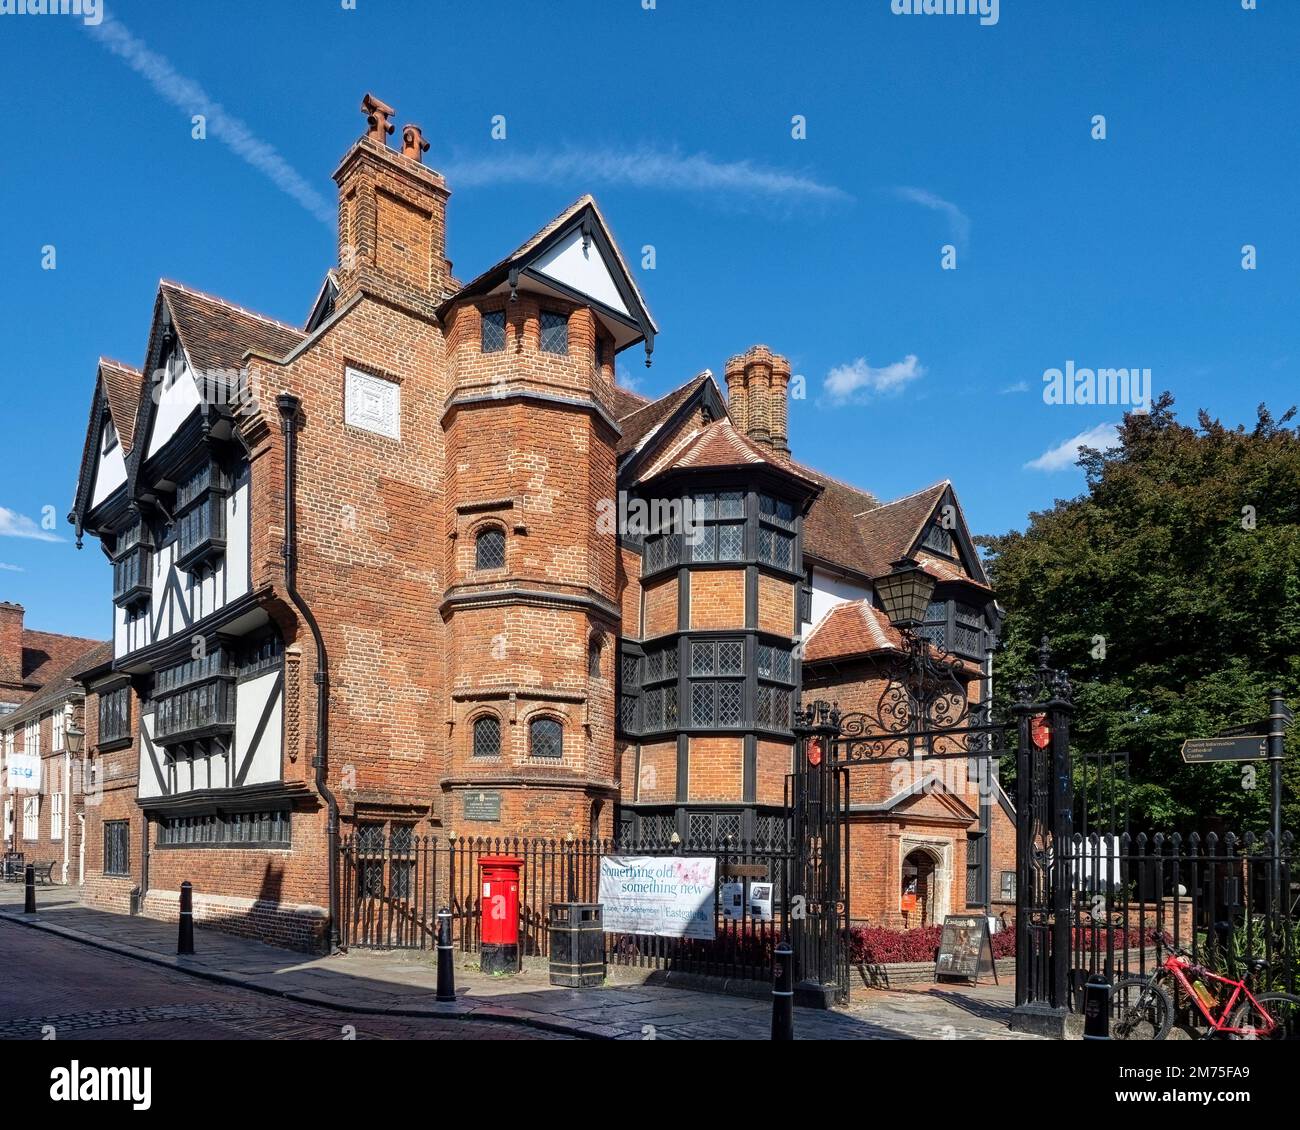 ROCHESTER, KENT, UK - SEPTEMBER 13, 2019:  Exterior view of Eastgate House, a grade 1 listed building in the High Street. Stock Photo